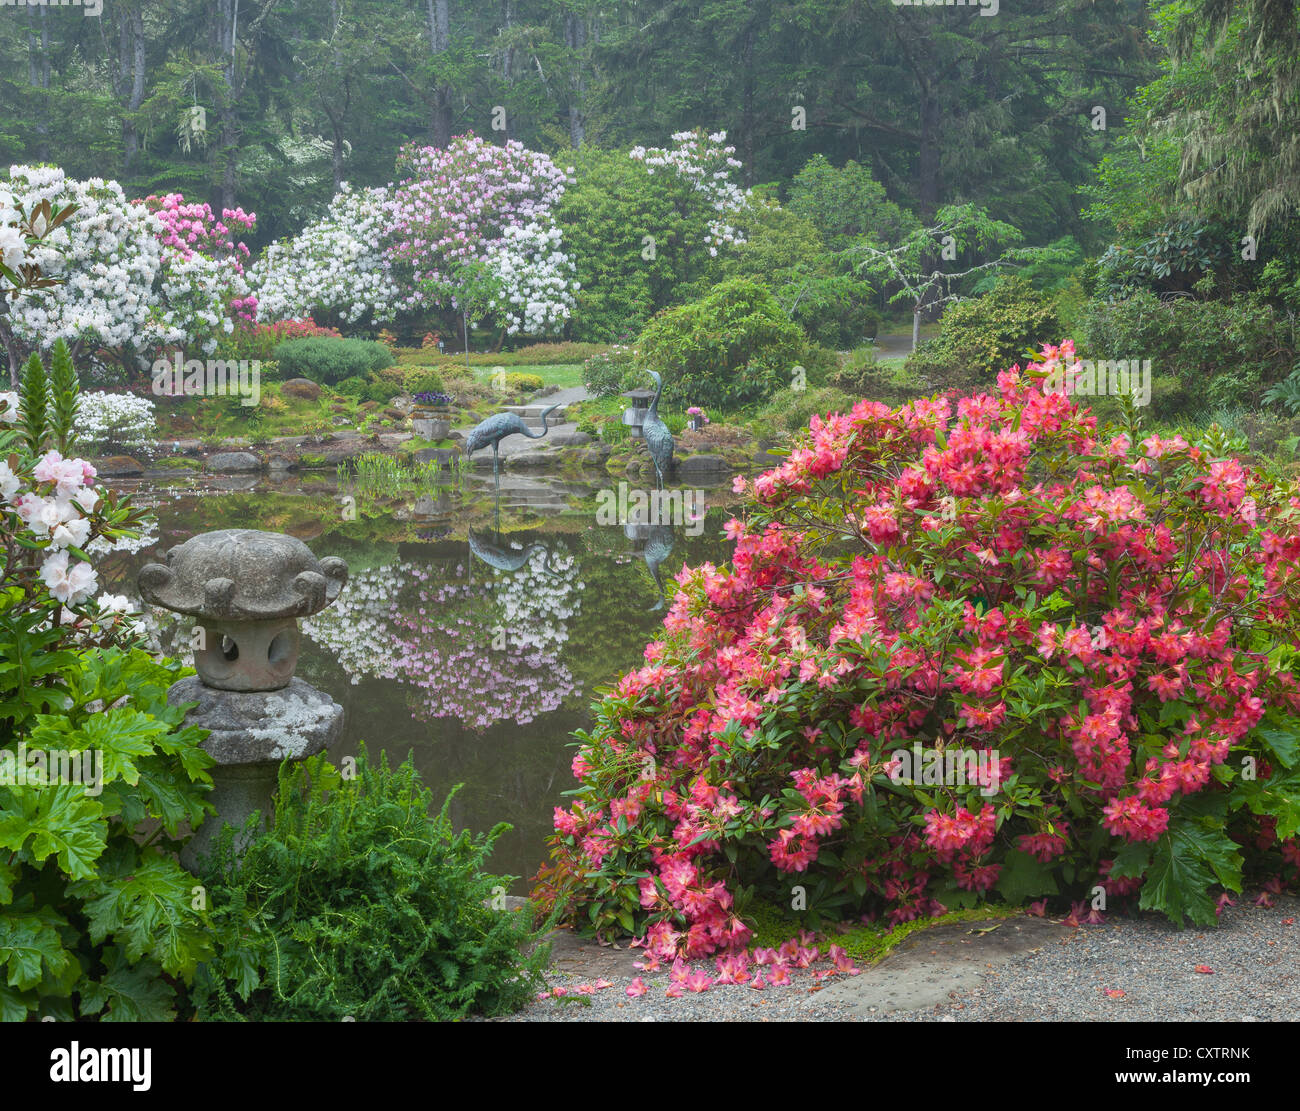 Shore Acres State Park, OR: Rhododendron 'Golden Gate' blooming by the pond at the Simpson Estate Garden in spring. Stock Photo